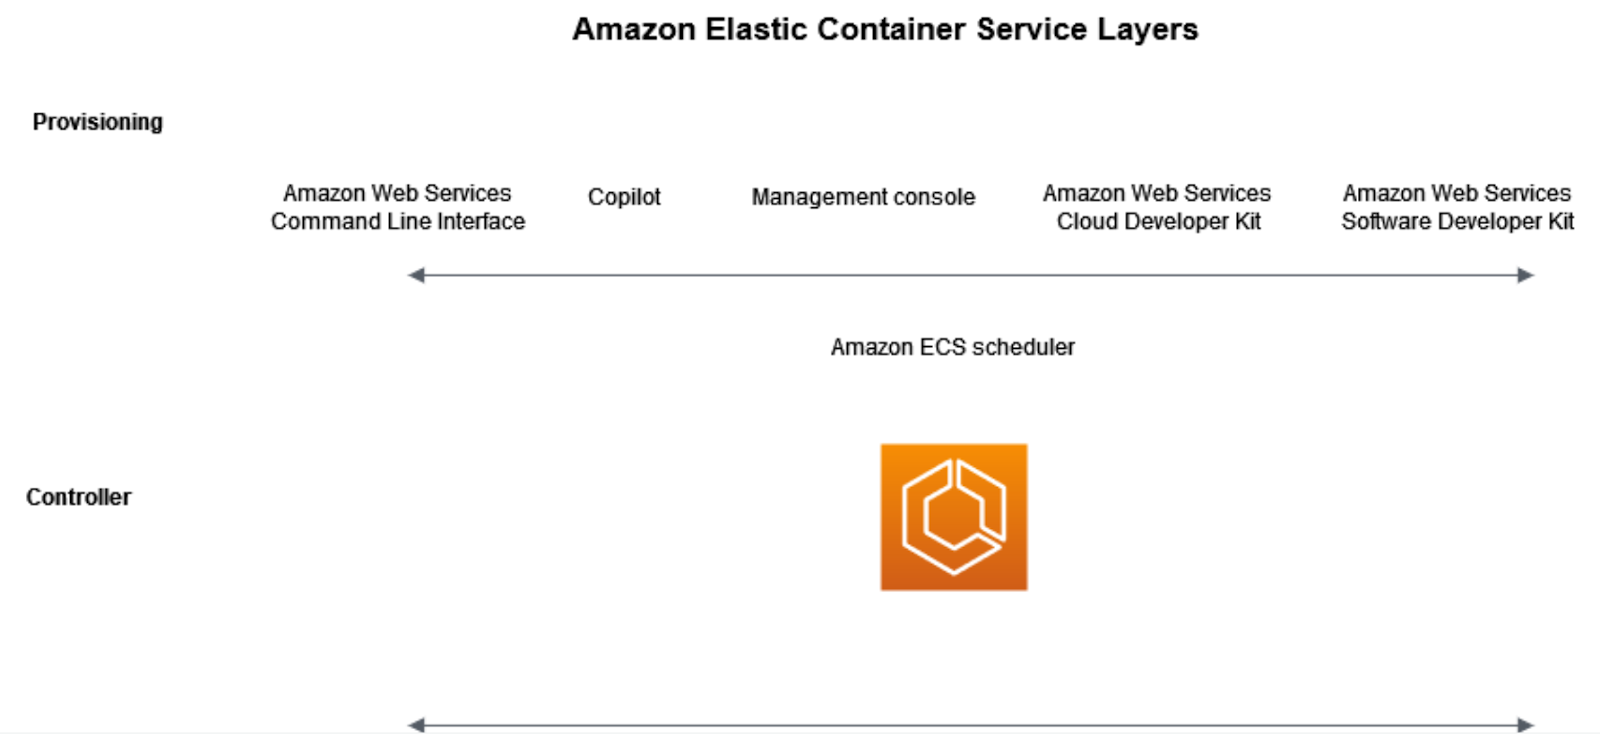 What is Amazon Elastic Container Service?
